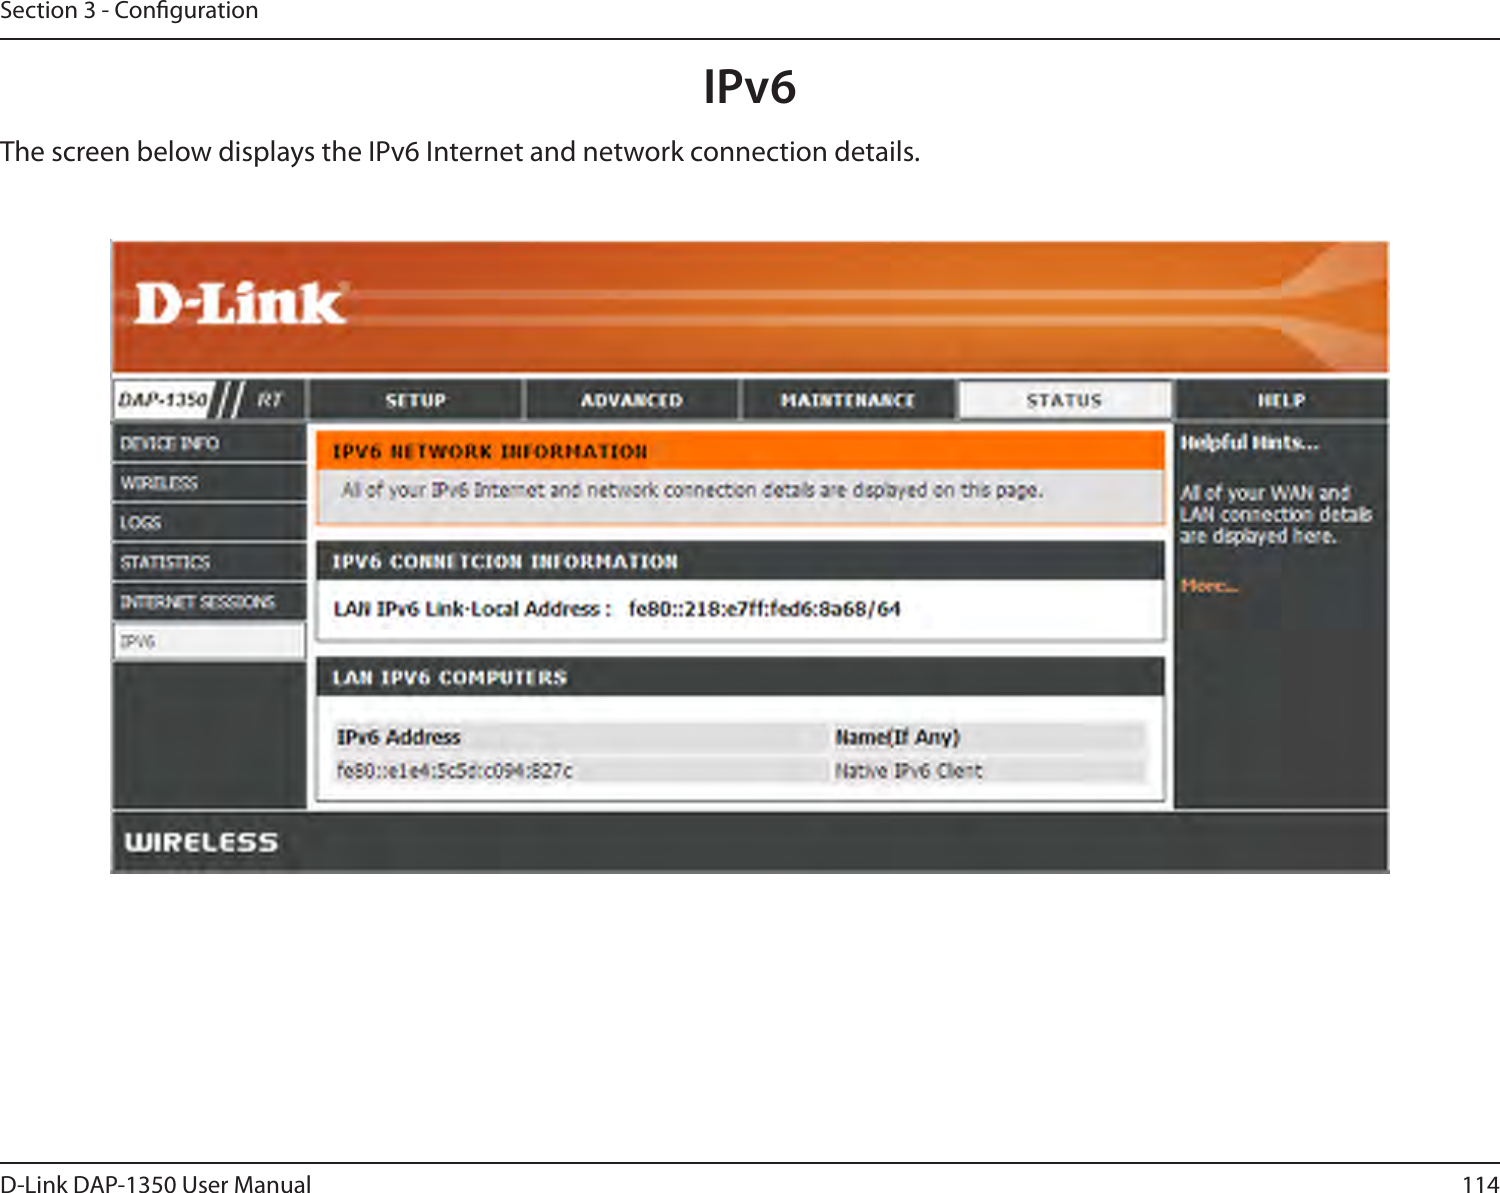 114D-Link DAP-1350 User ManualSection 3 - CongurationThe screen below displays the IPv6 Internet and network connection details. IPv6